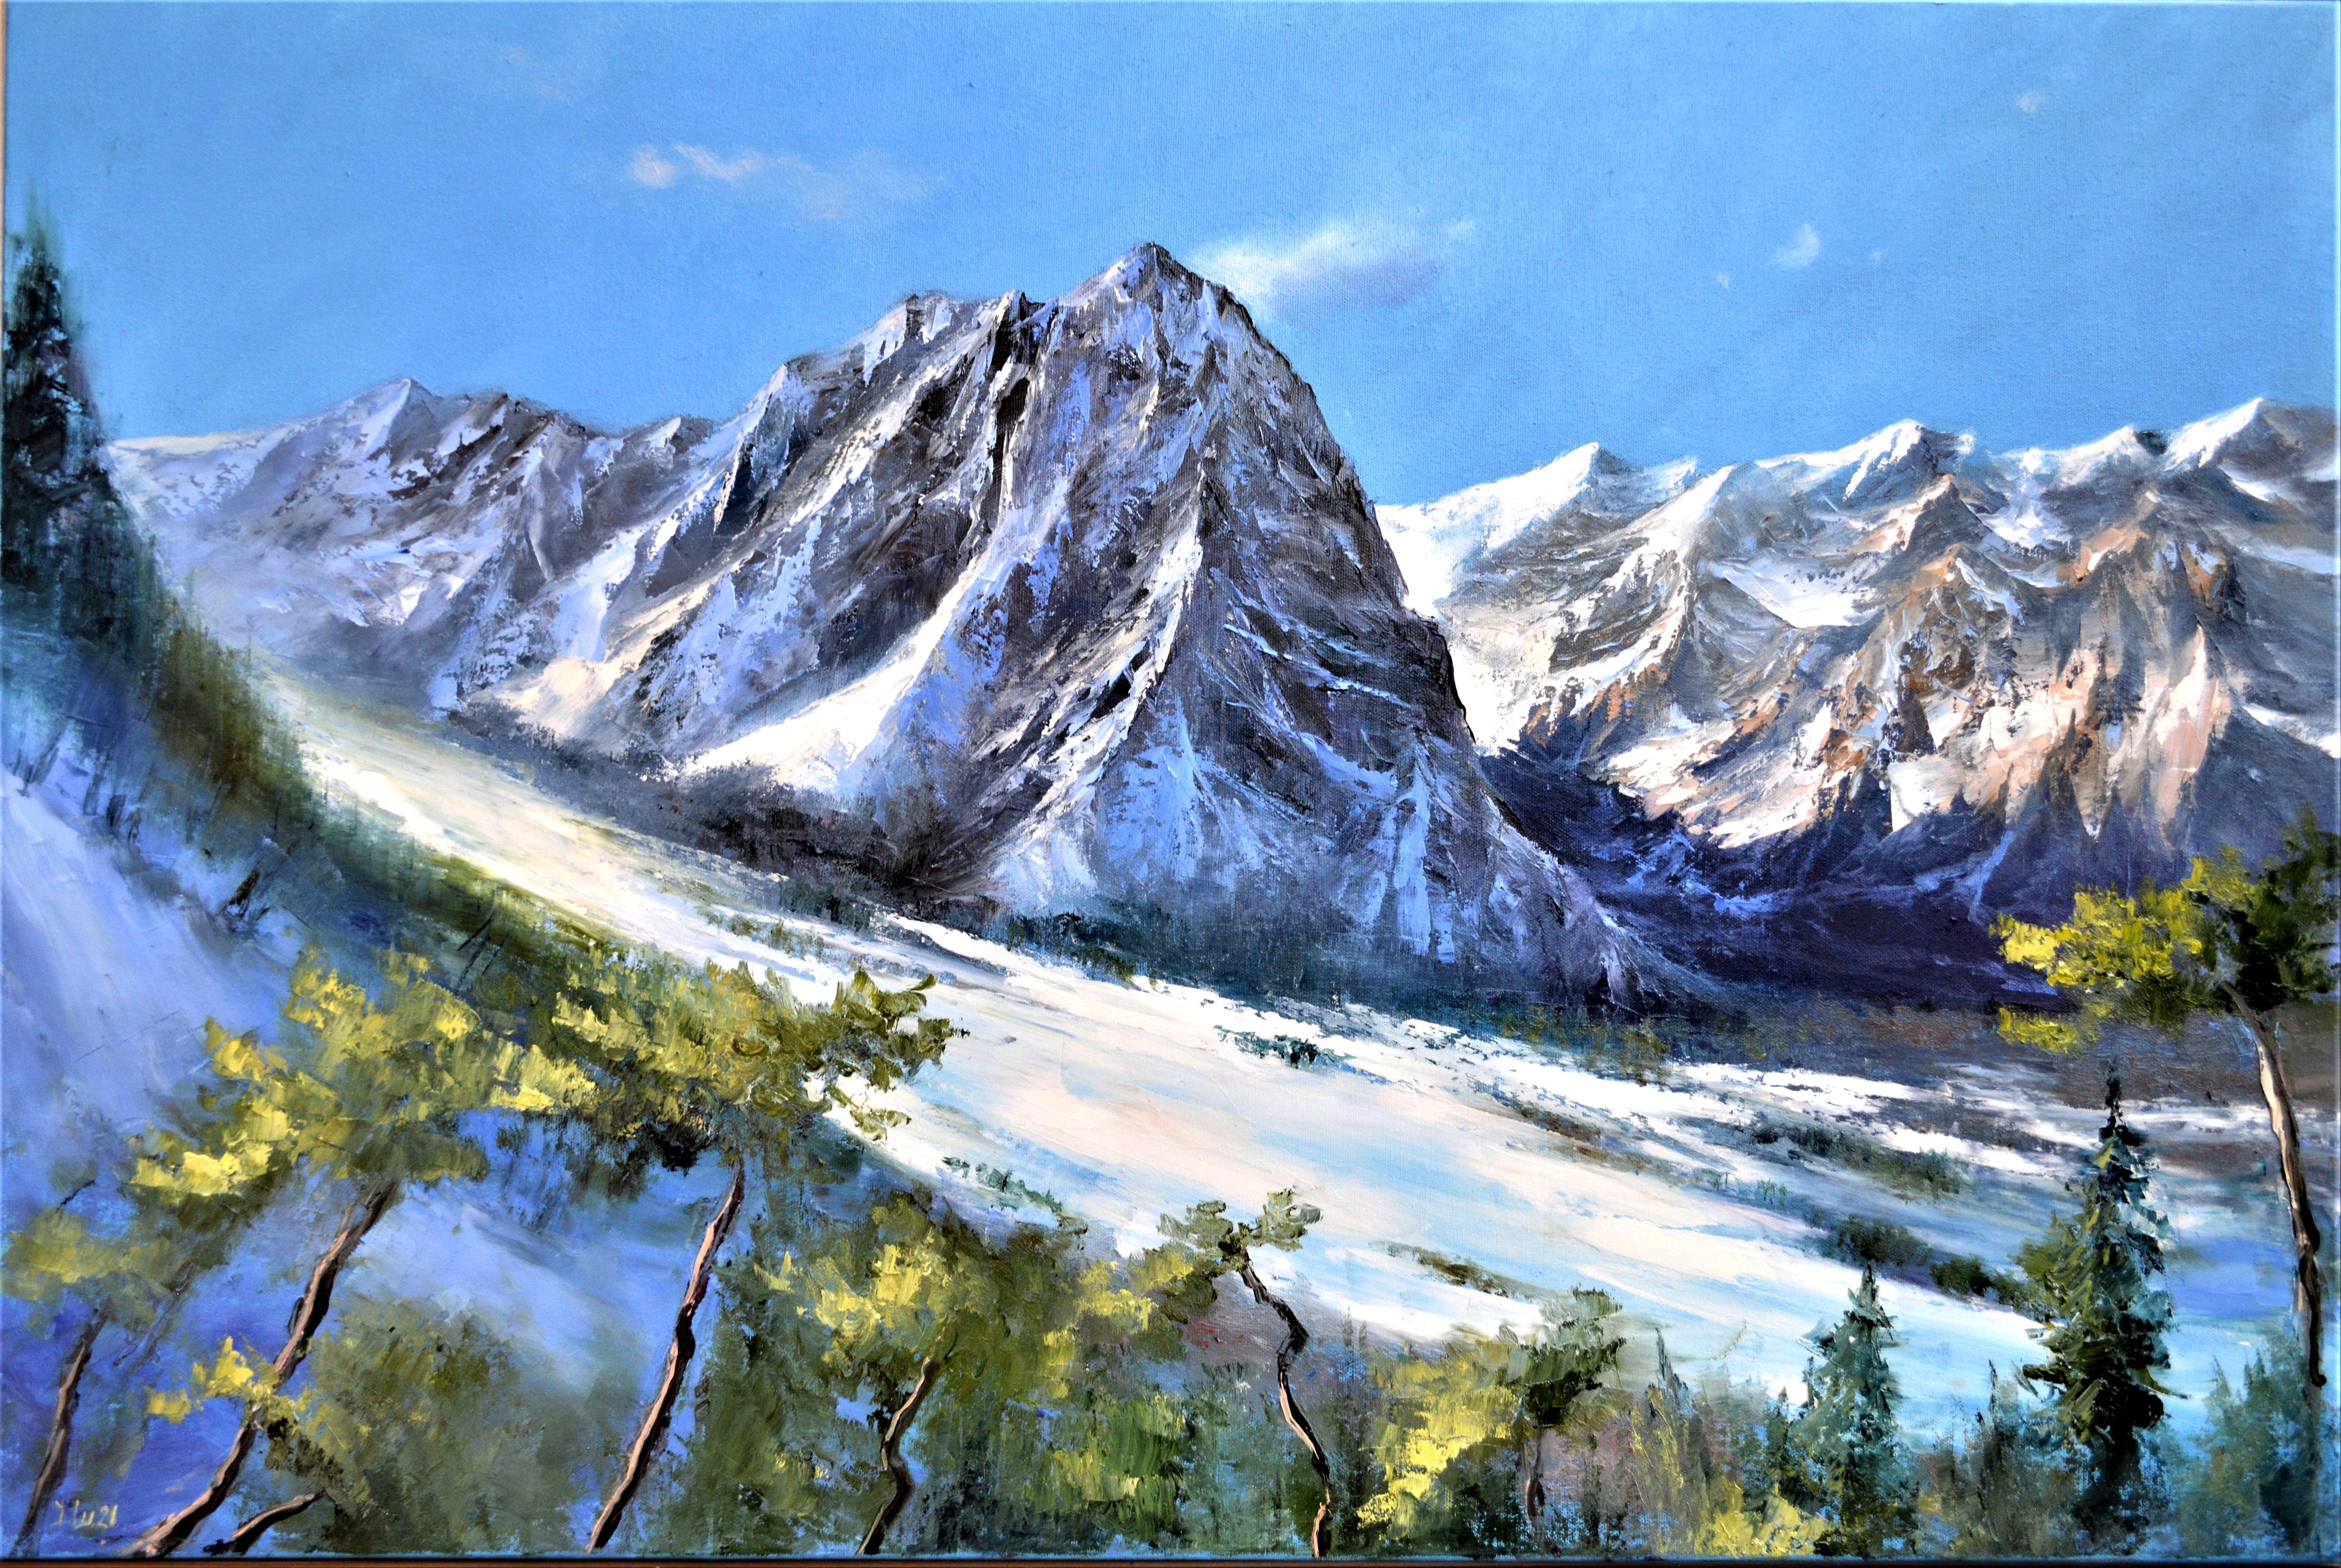 What attracts me to the mountains is their grandeur and perfection.  Clean mountain air, impressive size, and the joy of anticipating  a Christmas holiday in the mountains.  Ski slope, snow, joy of Christmas and a wonderful winter!    Painting by